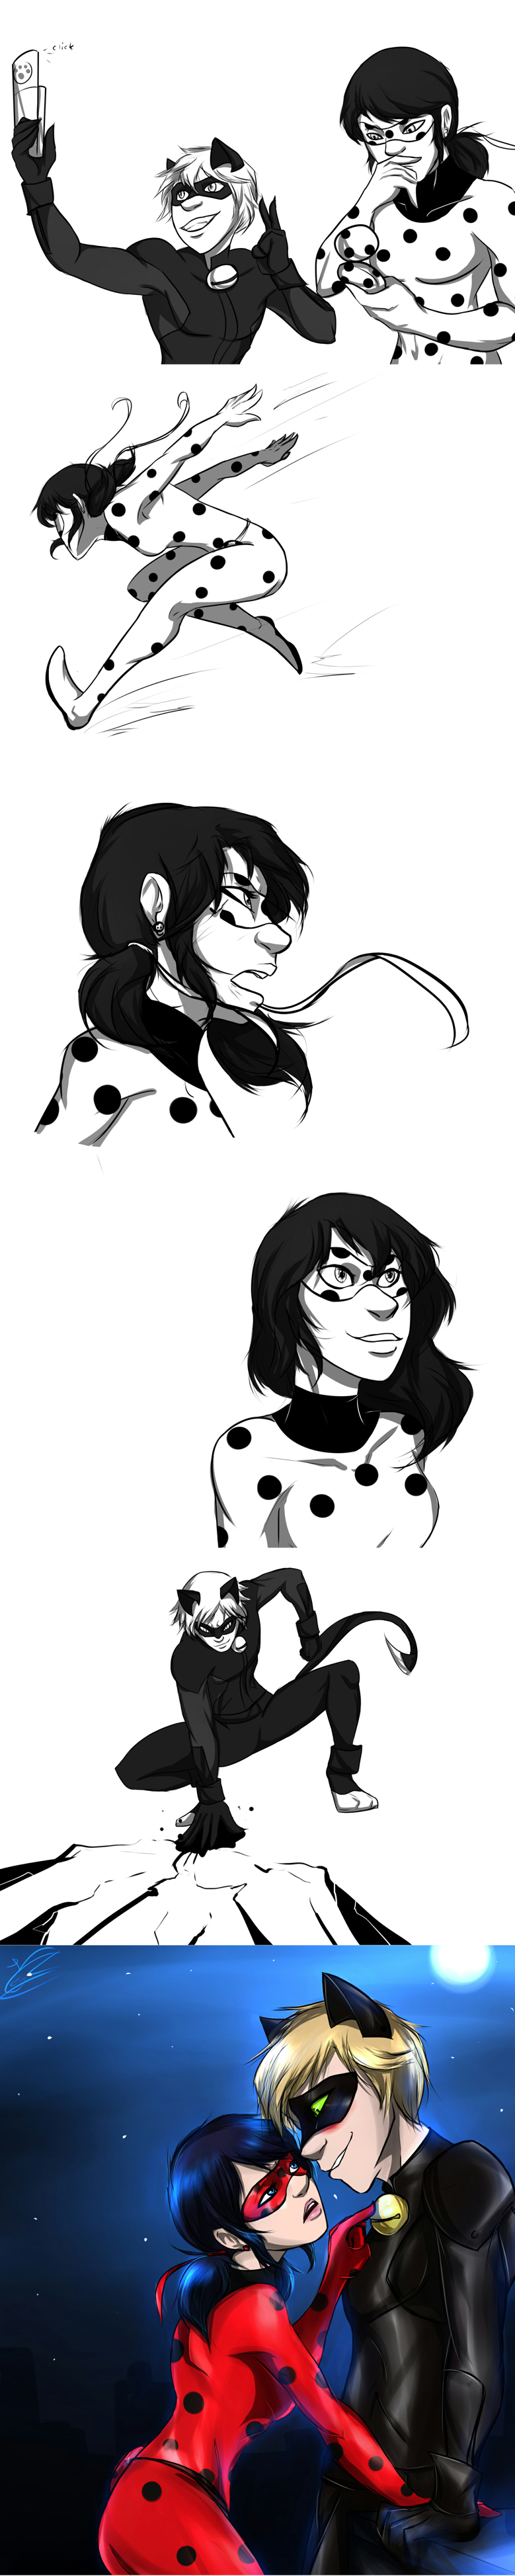 Some Ladybug sketches by MegS-ILS on DeviantArt